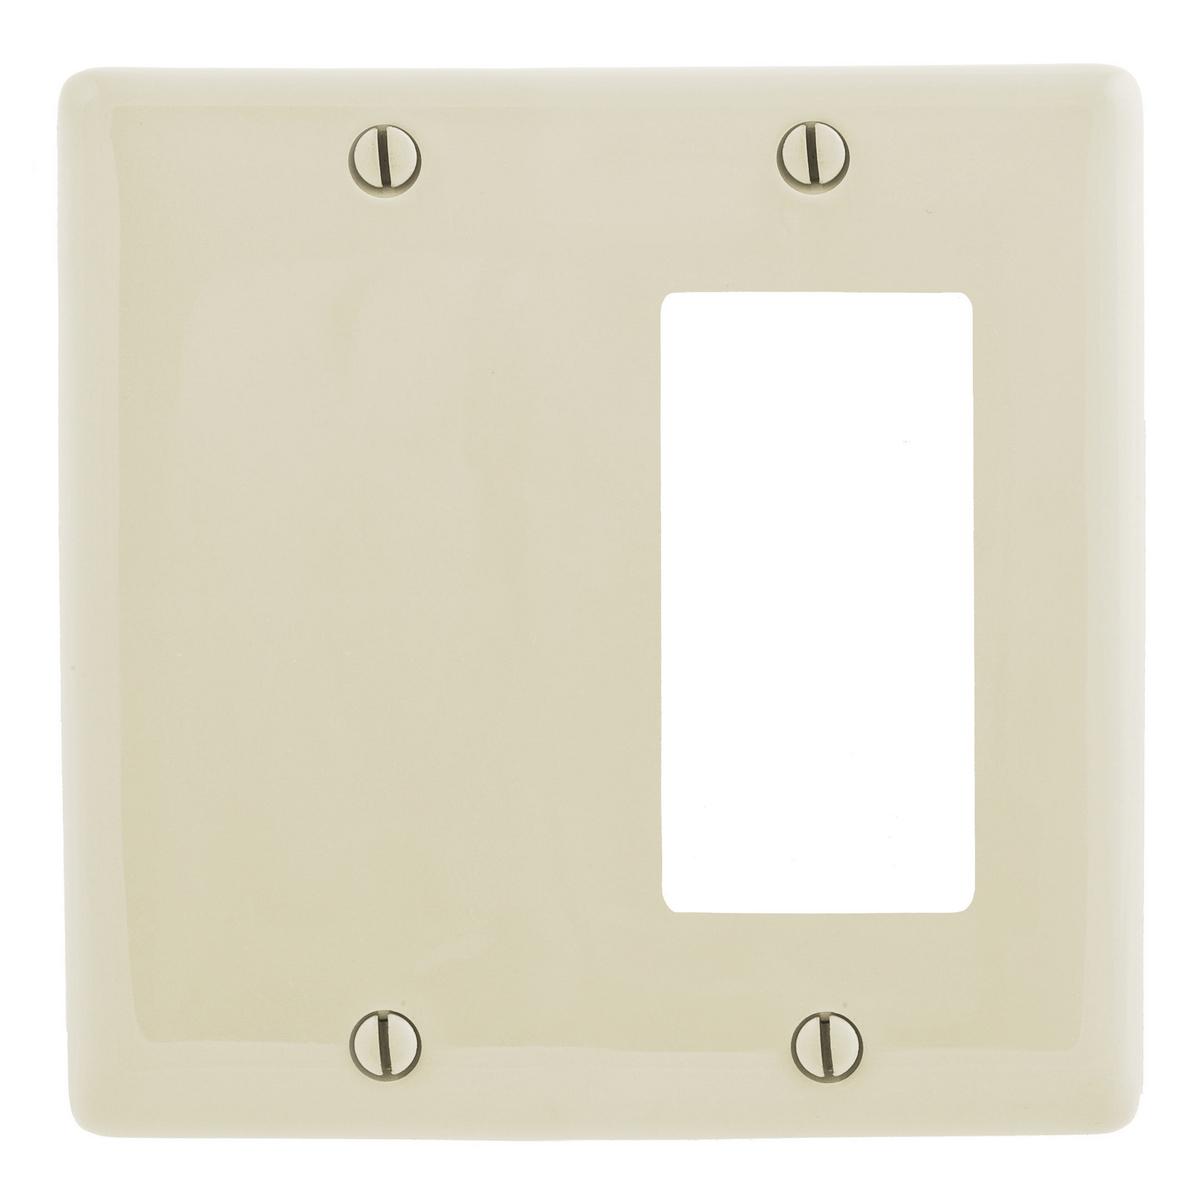 Hubbell NP1326LA Wallplates and Box Covers, Wallplate, Nylon, 2-Gang, 1) Decorator 1) Blank, Light Almond  ; Reinforcement ribs for extra strength ; High-impact, self-extinguishing nylon material ; Captive screw feature holds mounting screw in place ; Standard Size is 1/8